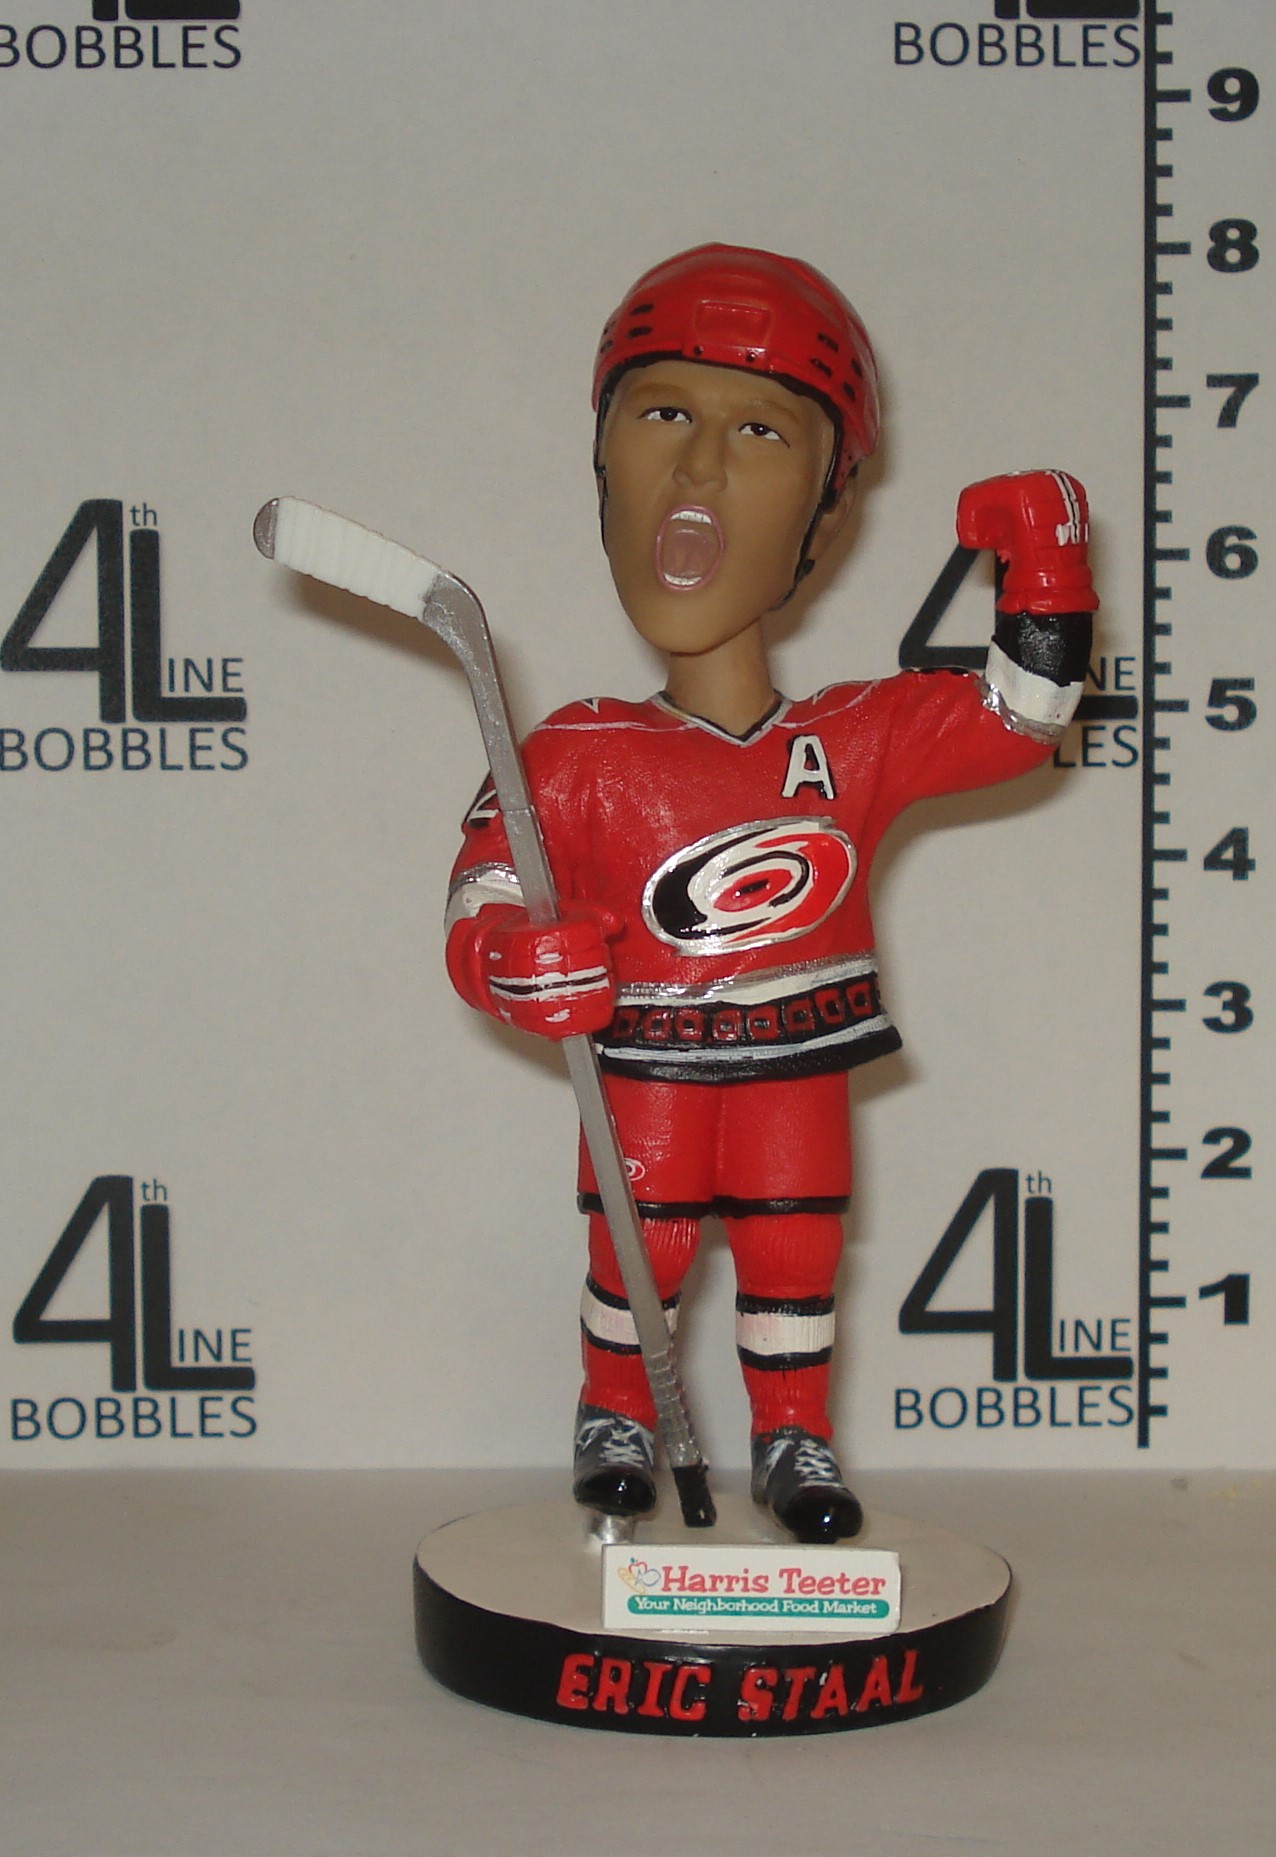 Eric Staal bobblehead